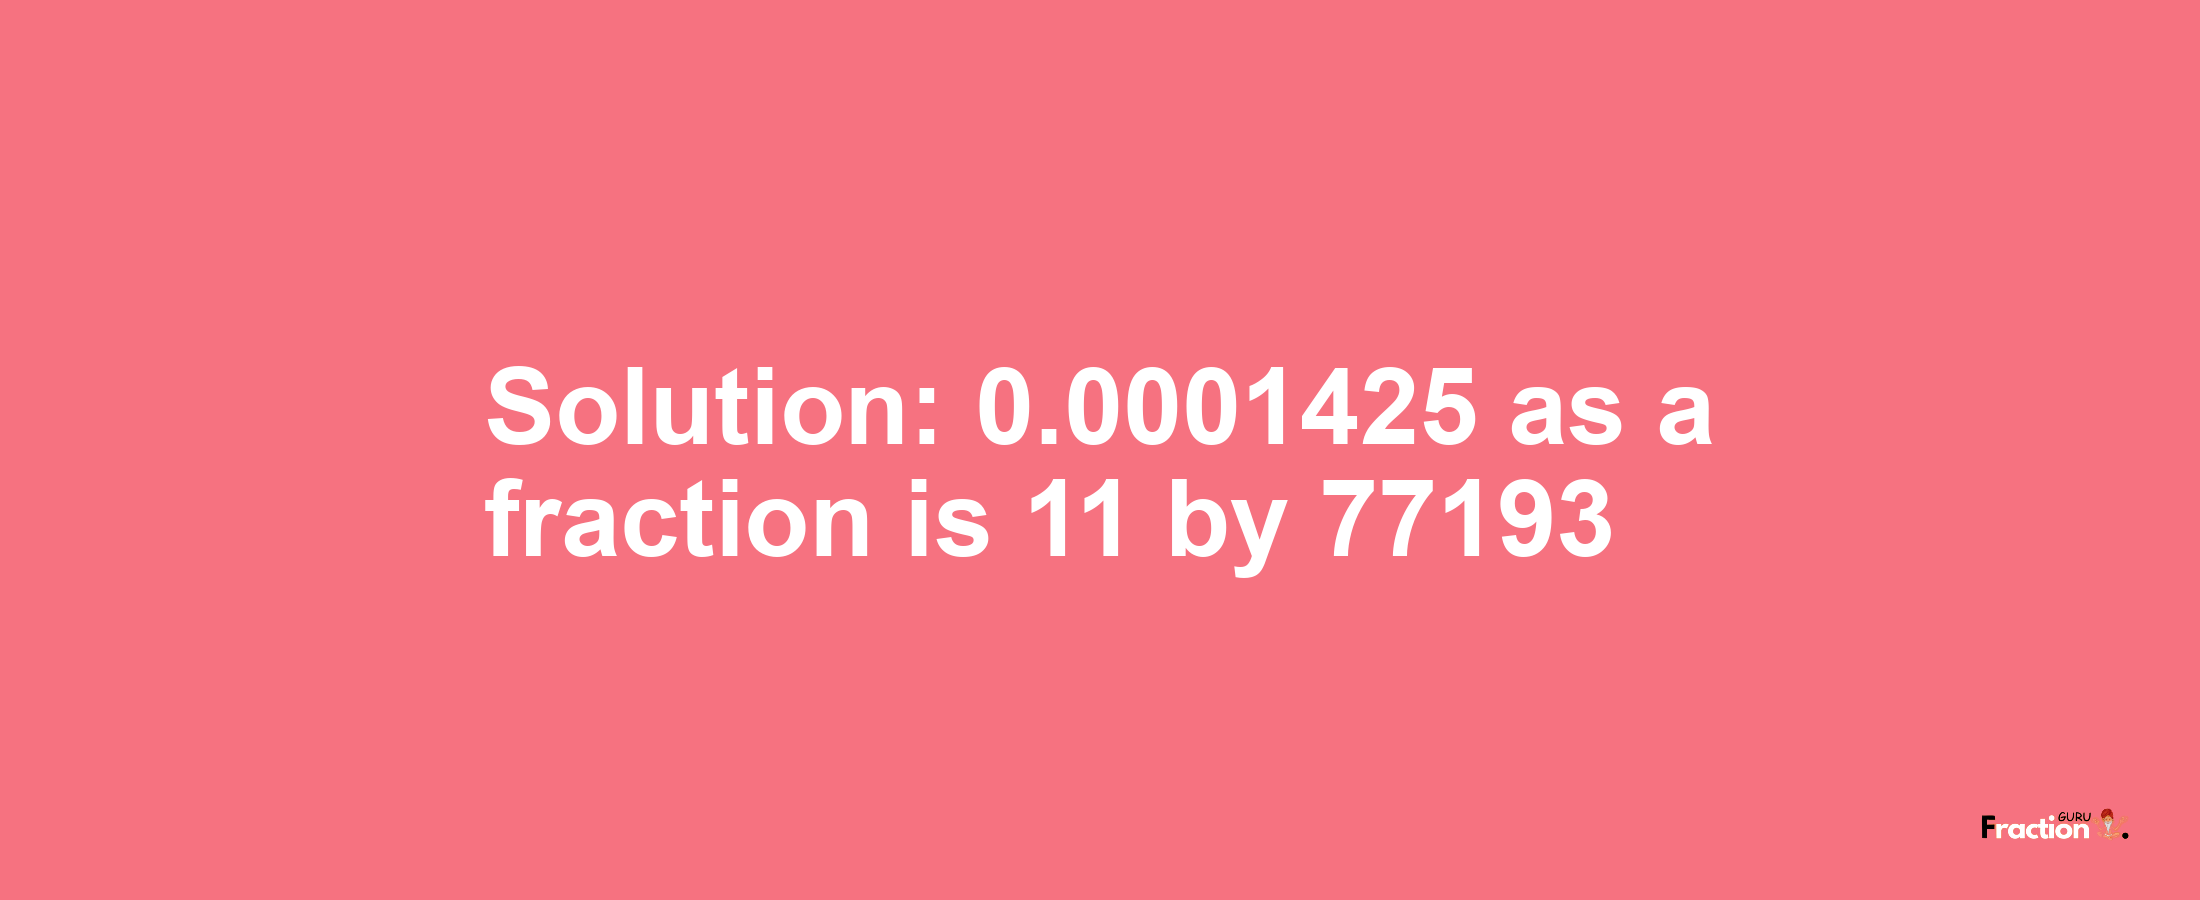 Solution:0.0001425 as a fraction is 11/77193